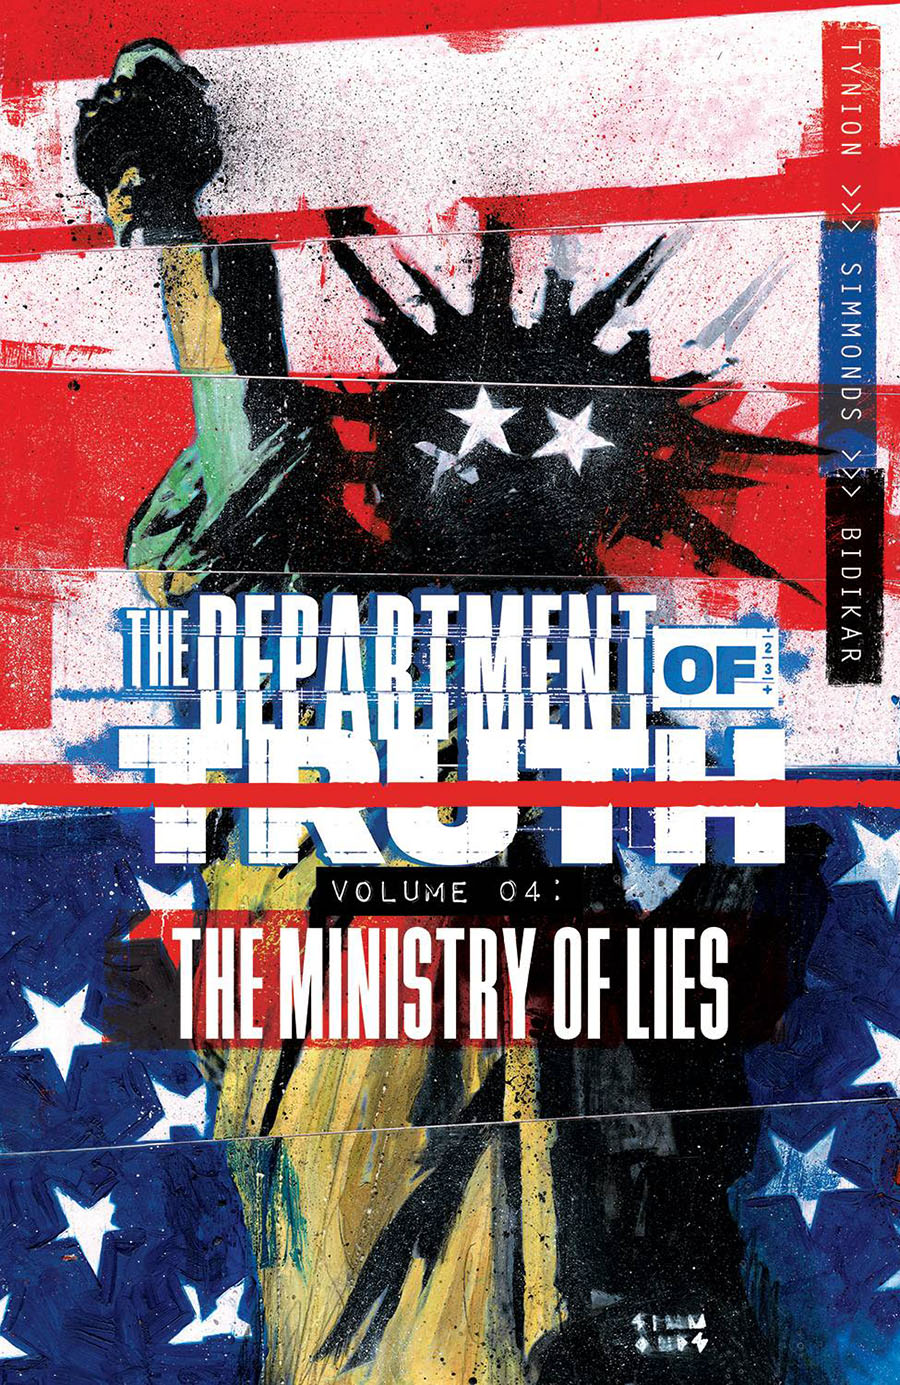 Department Of Truth Vol 4 The Ministry Of Lies TP